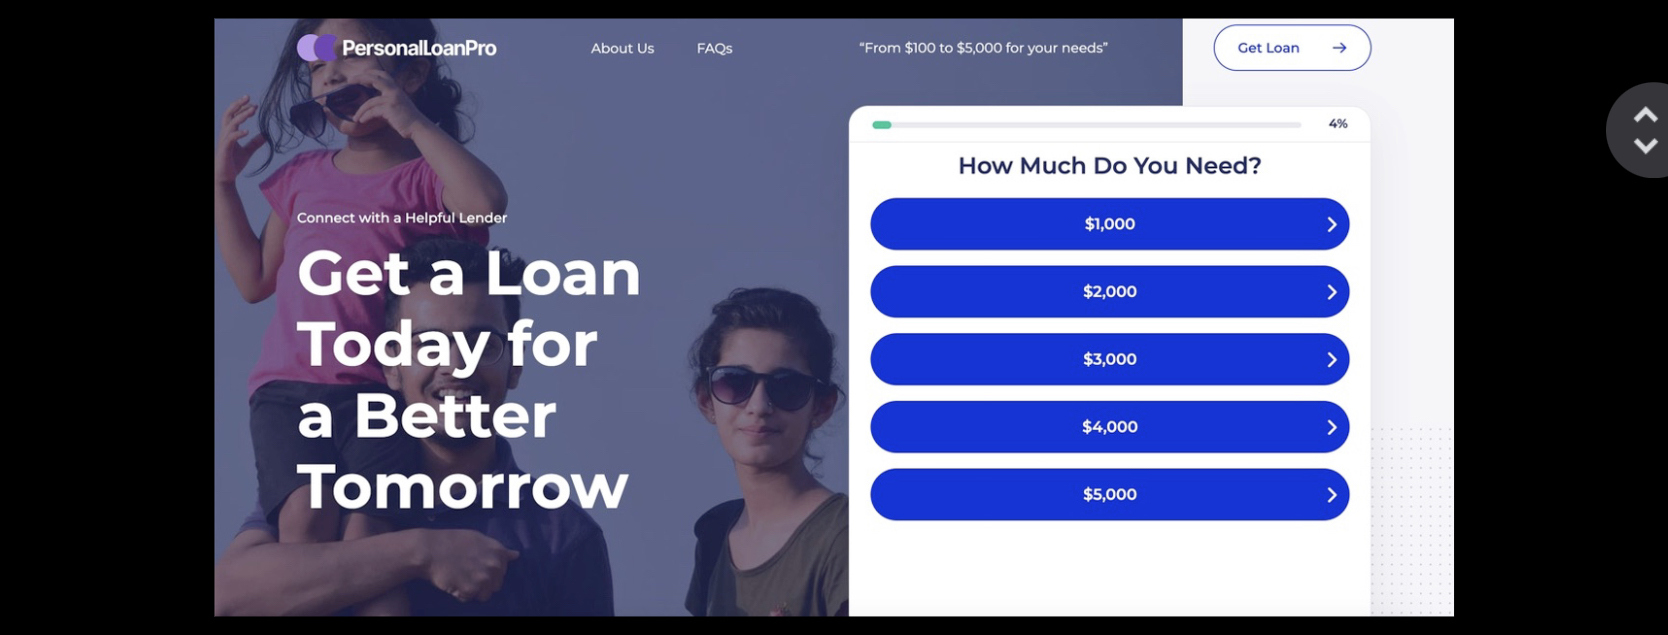 Personal Loan Pro Review - The Best Personal Loan Service